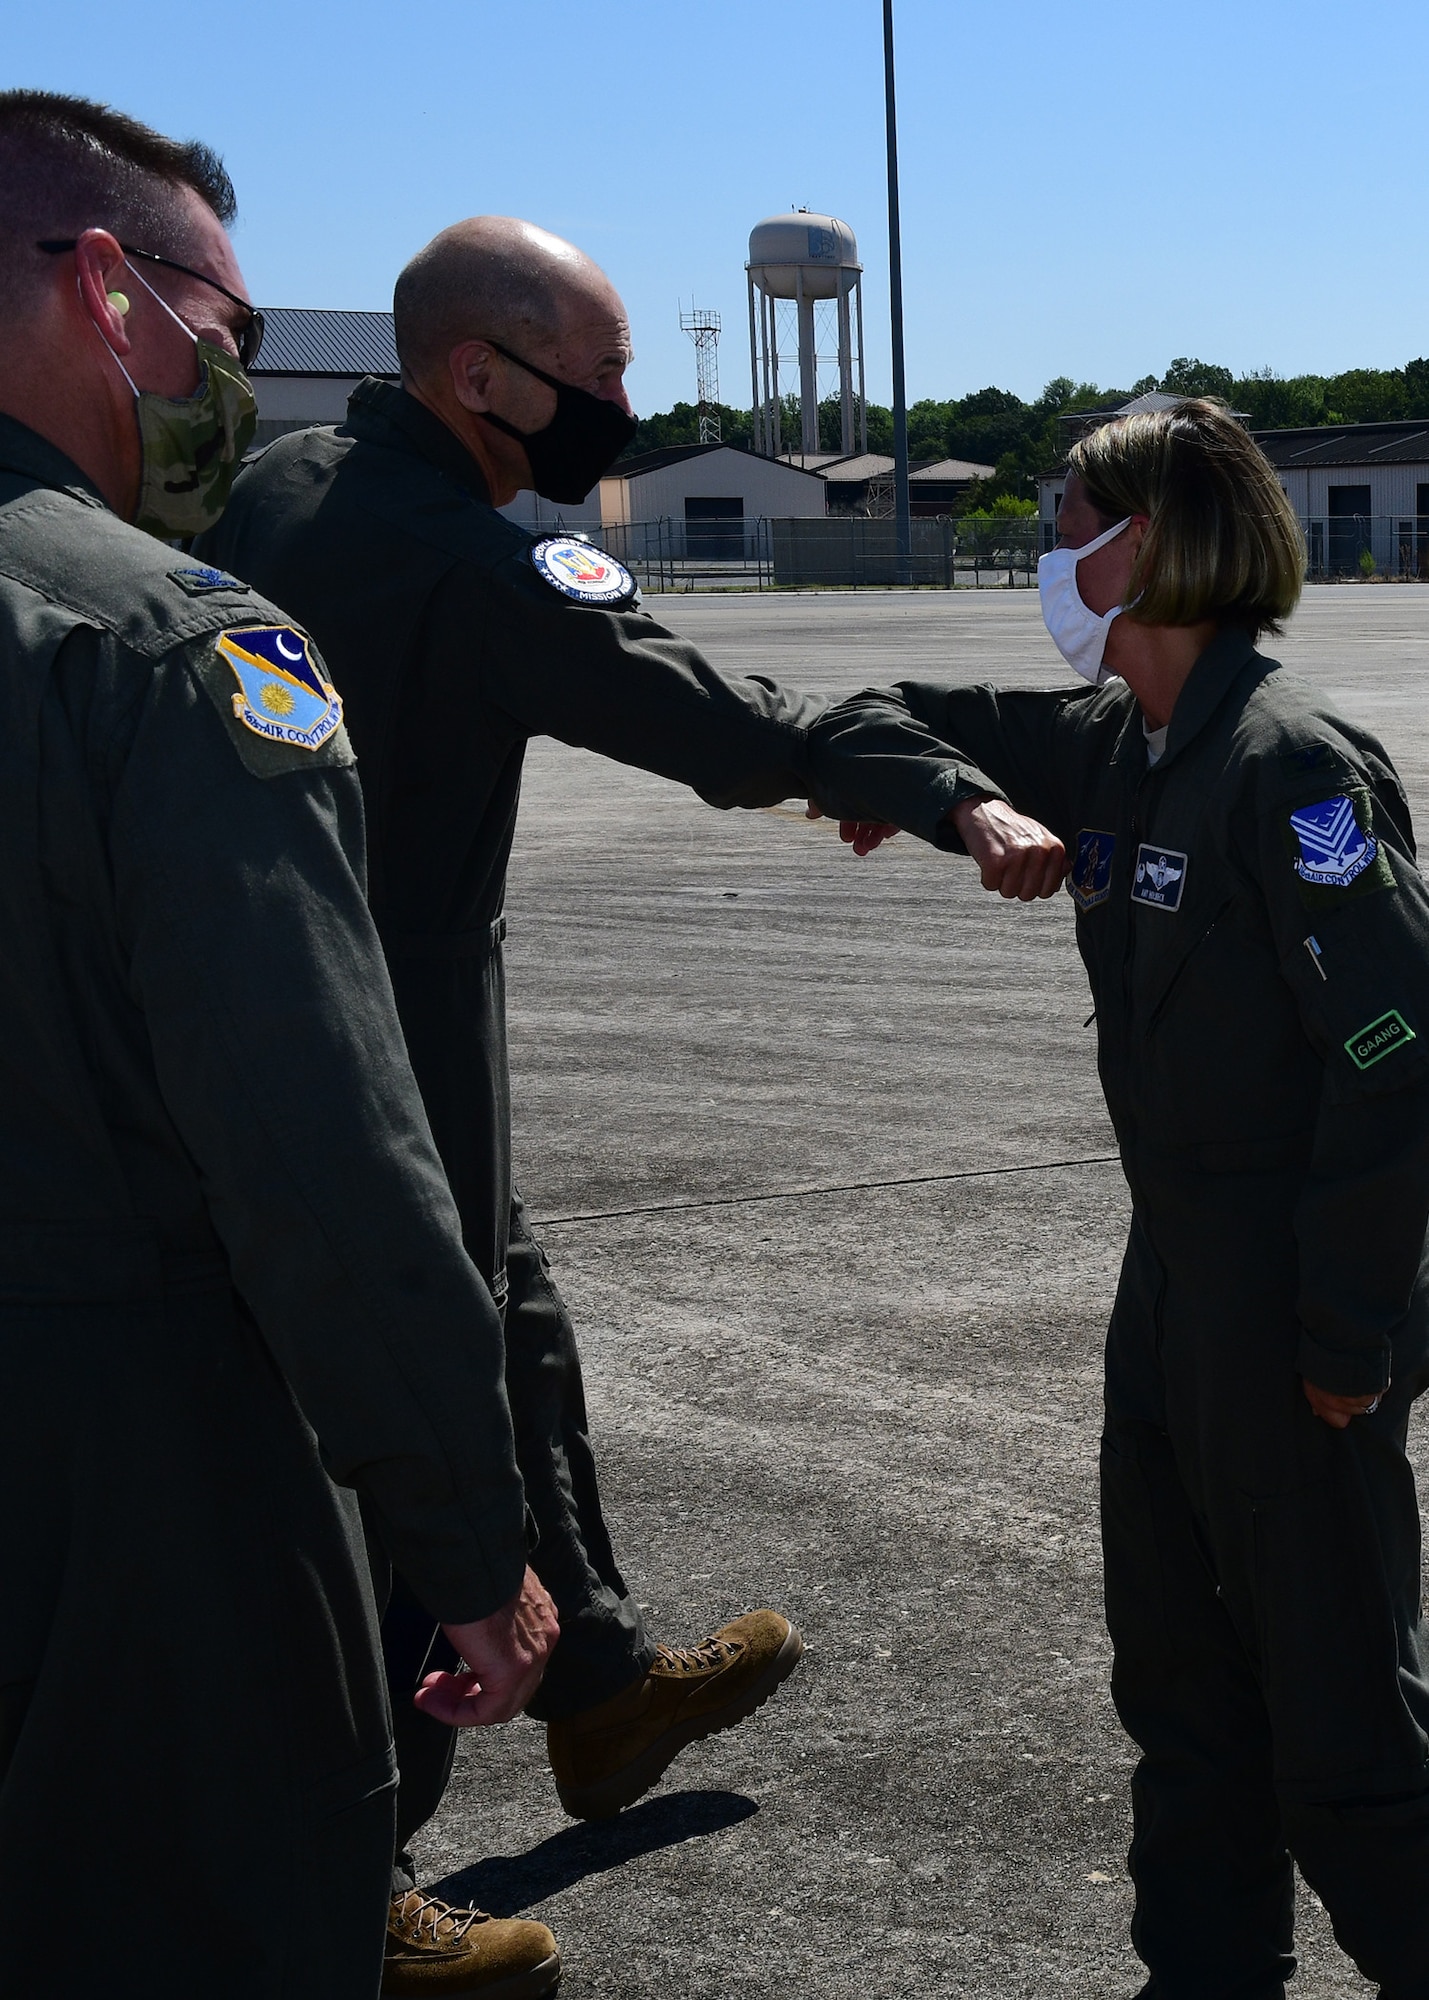 U.S. Air Force Col. Amy Holbeck, 116th Air Control Wing commander, Georgia Air National Guard, welcomes Gen. Mike Holmes, commander of Air Combat Command, to Team JSTARS at Robins Air Force Base, Georgia, July 20, 2020. Holmes is responsible for organizing, training, equipping and maintaining combat-ready air, space, cyber and intelligence forces for rapid deployment and employment while ensuring strategic air defense forces are ready to meet the challenges of peacetime air sovereignty and wartime defense. (U.S. Air National Guard photo by Barry Bena)